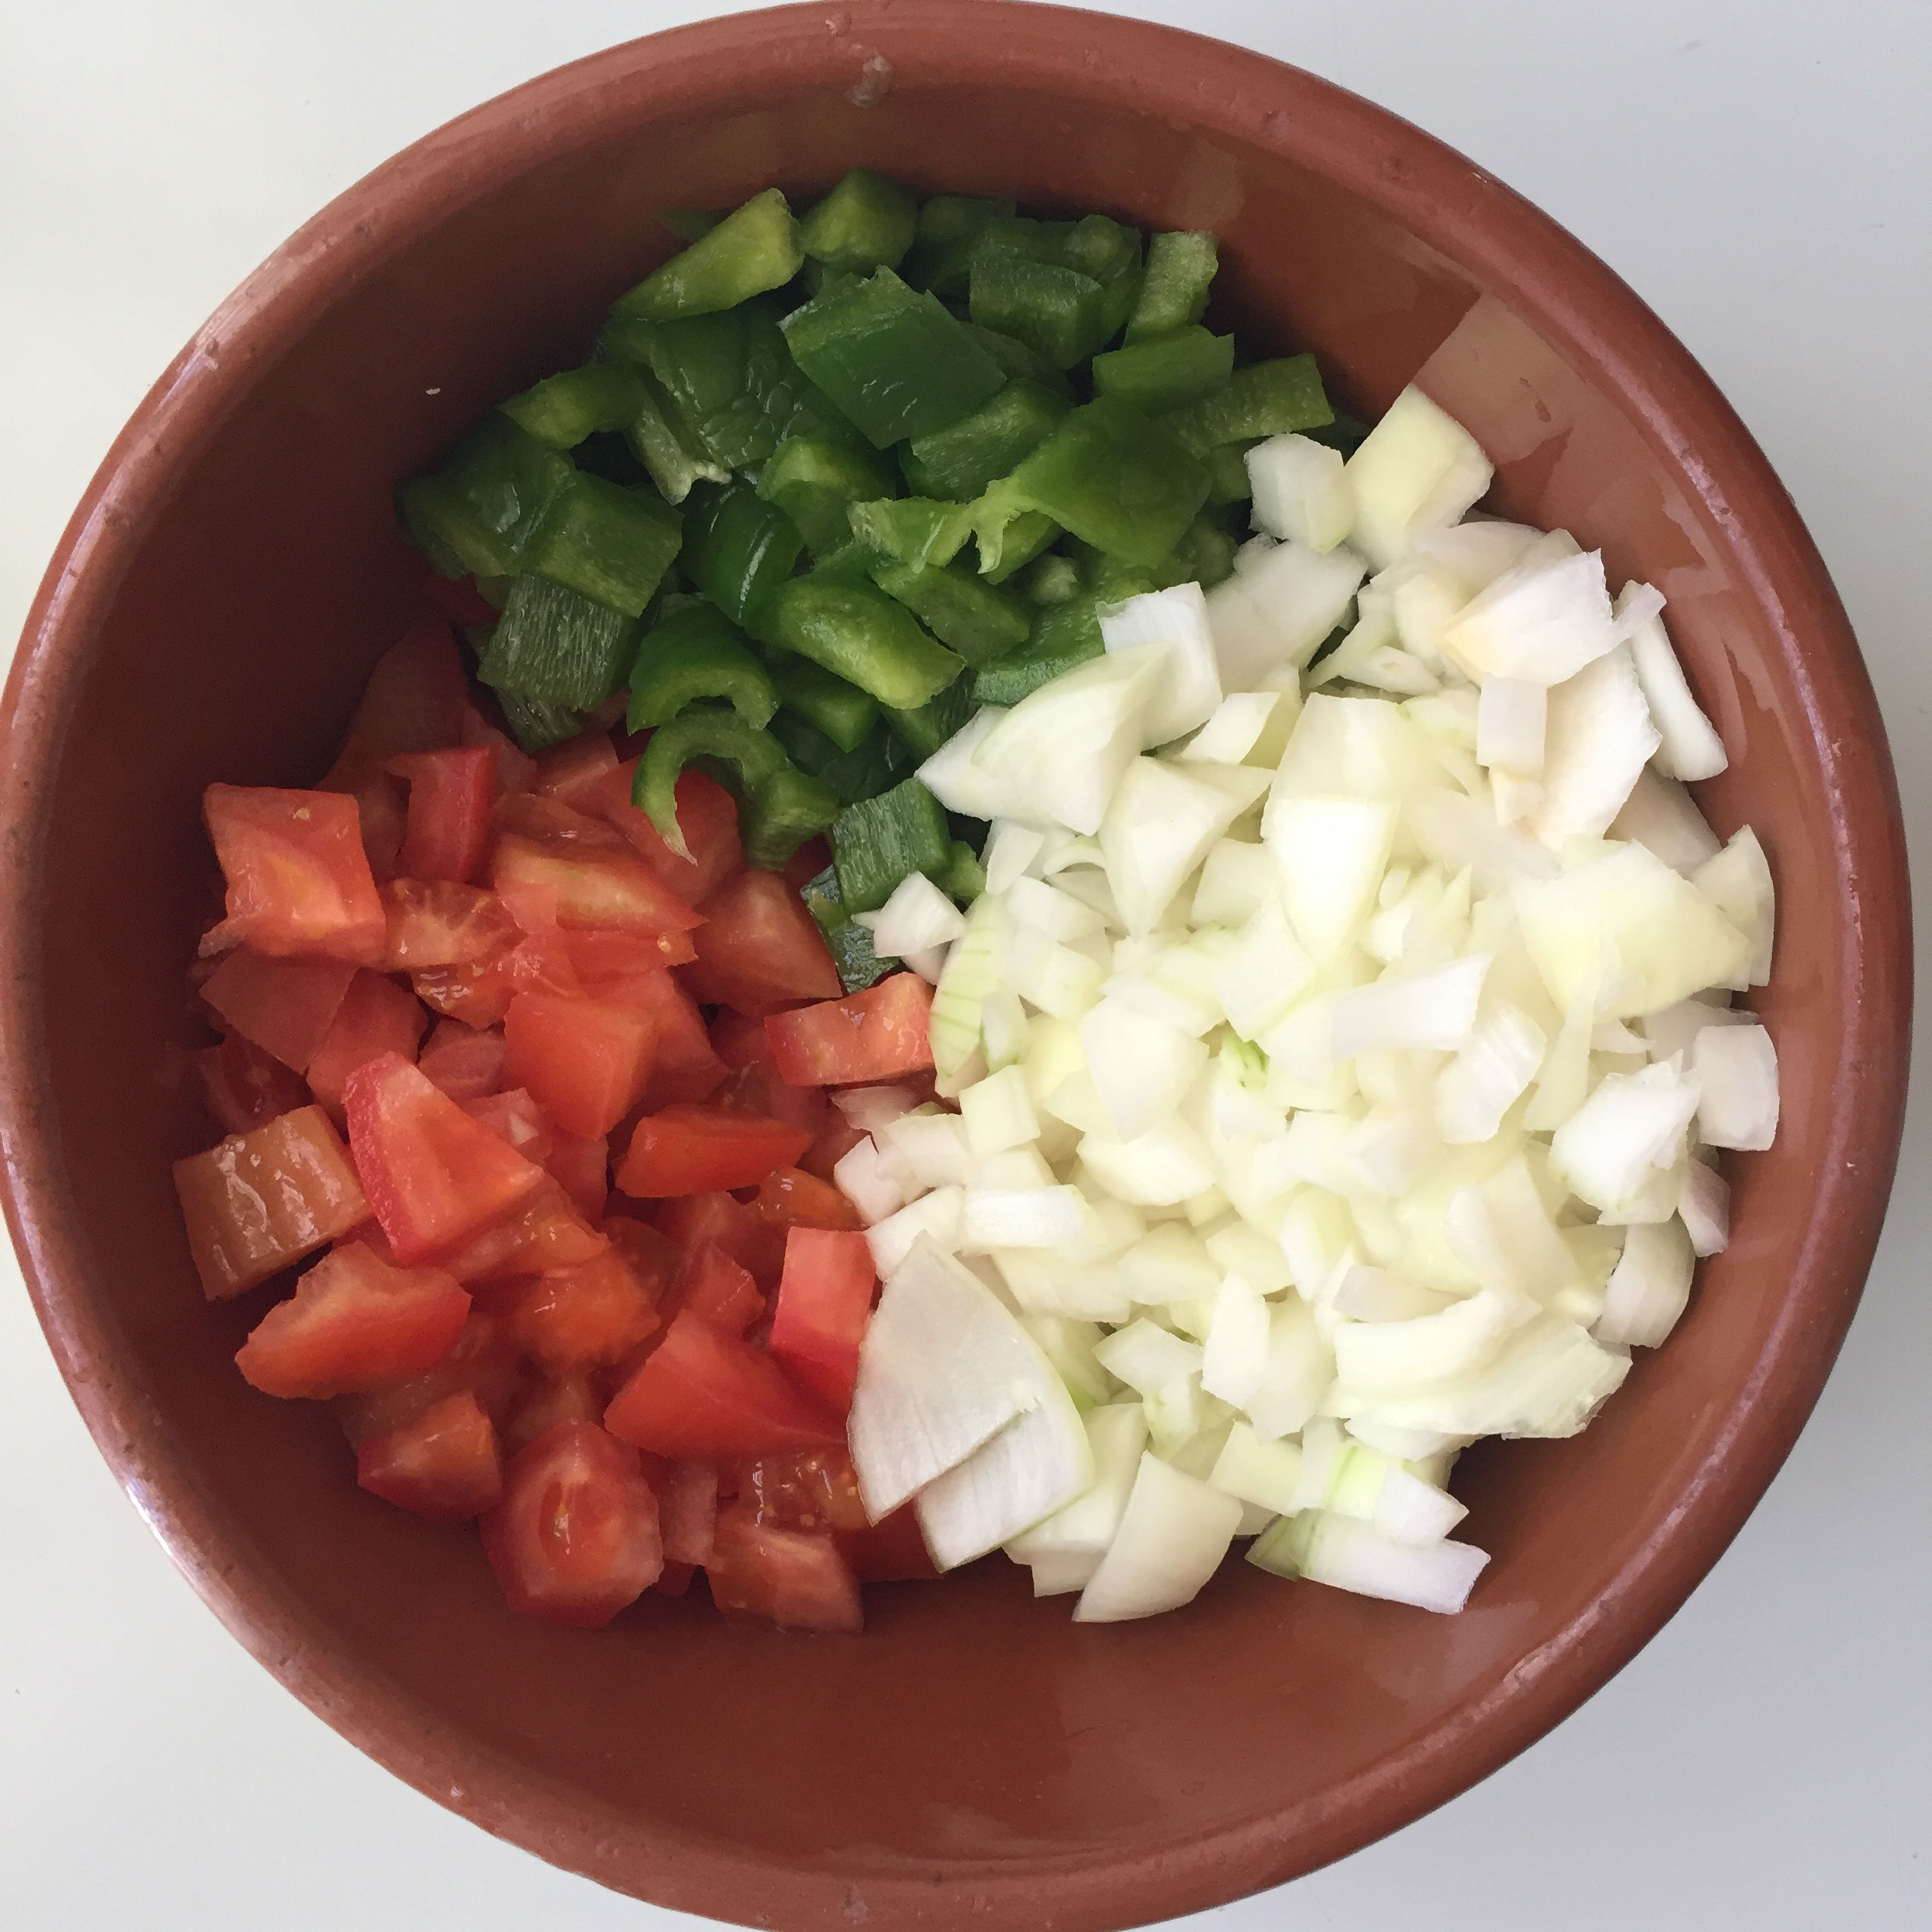 Chop onion, tomatoes and green bell pepper. Red bell pepper would also work fine, but the green enhaces the colors of the salad. 